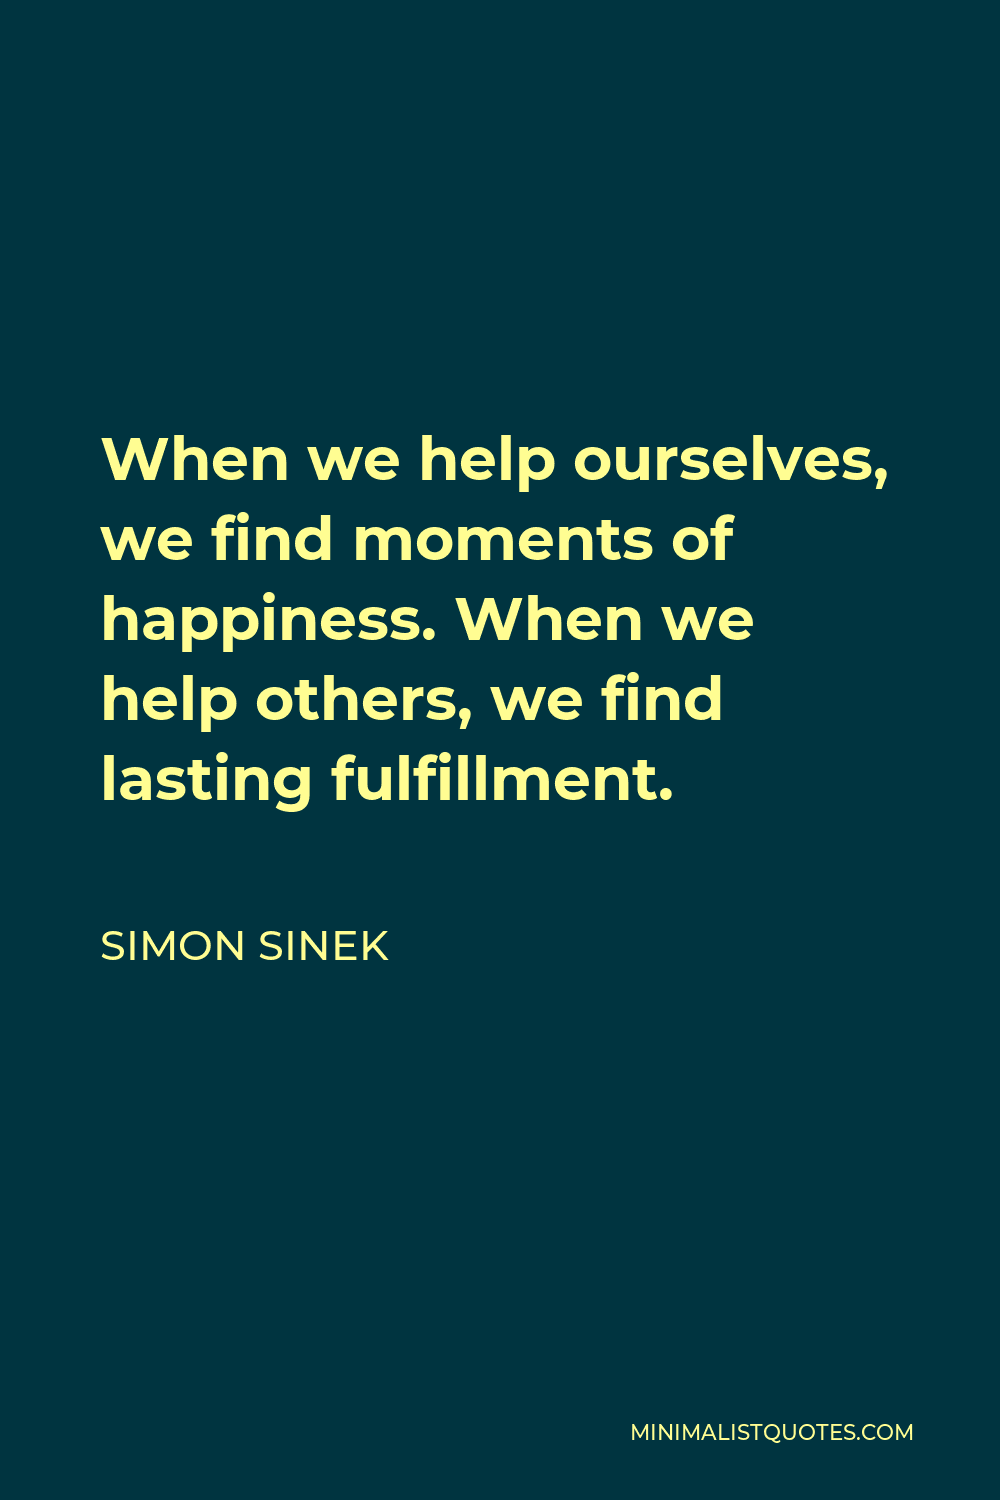 Simon Sinek Quote - When we help ourselves, we find moments of happiness. When we help others, we find lasting fulfillment.